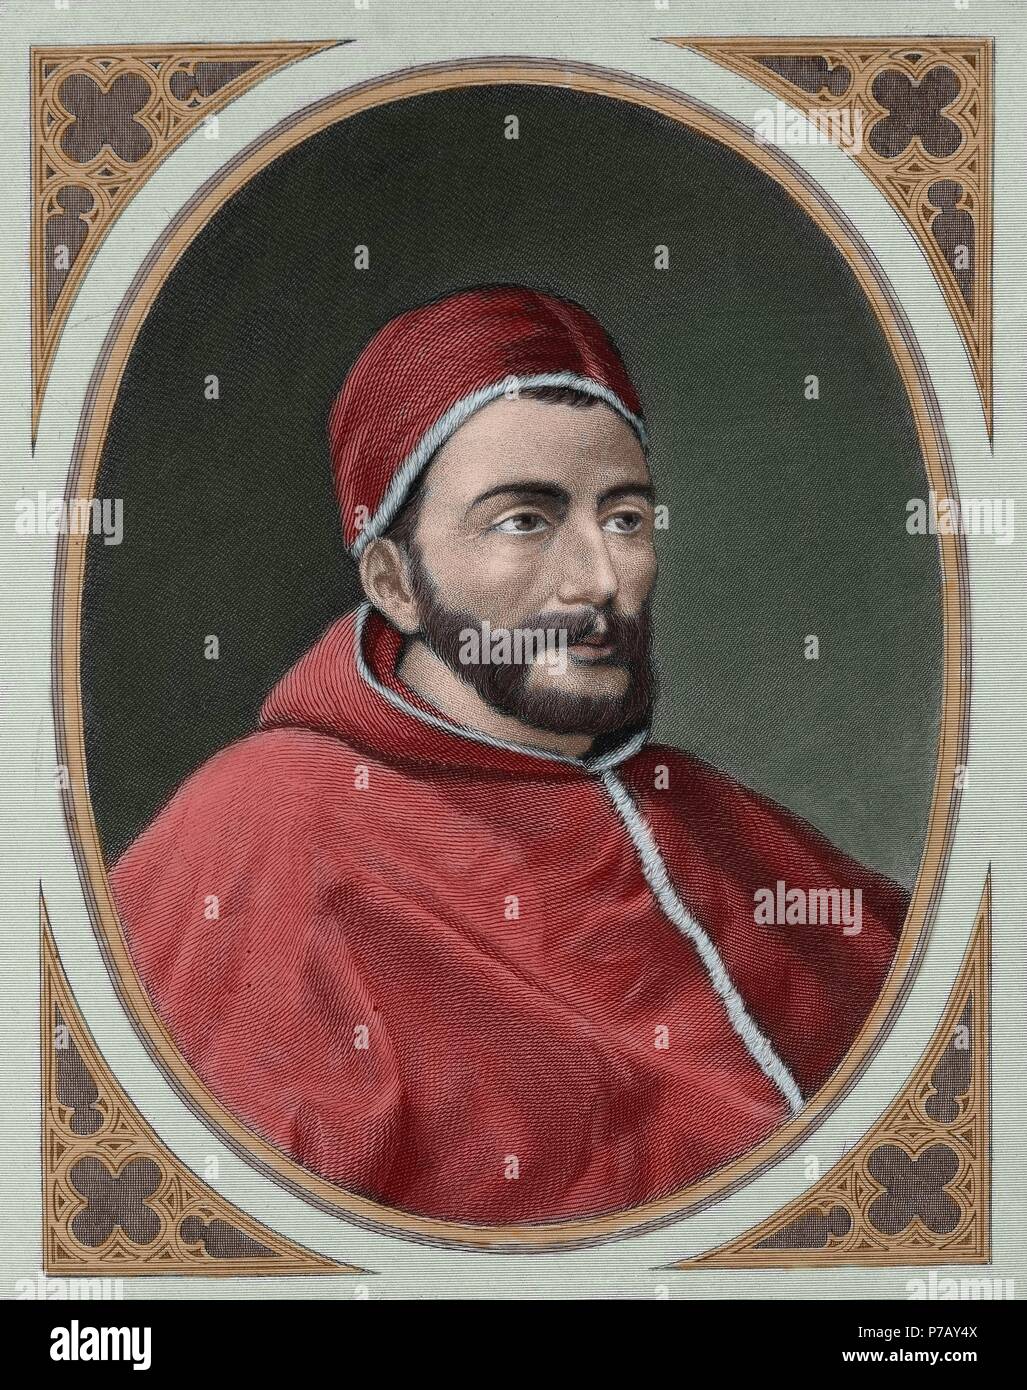 Clement VII (1342-1394). Pope of the Roman Catholic Church. Engraving, 1882. Colored. Stock Photo